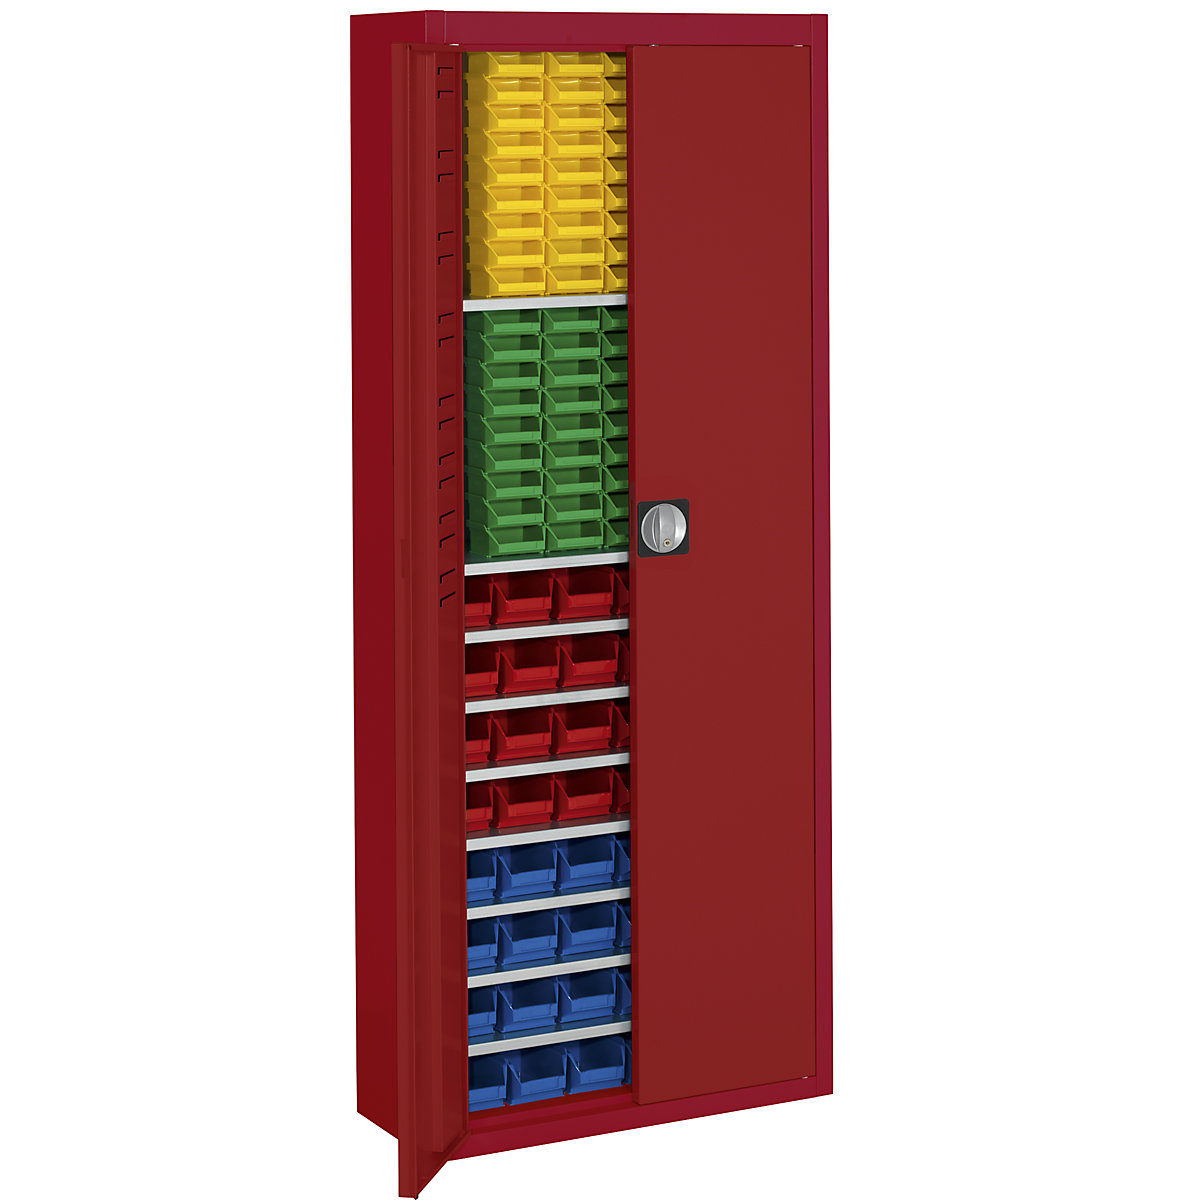 Storage cupboard with open fronted storage bins – mauser, HxWxD 1740 x 680 x 280 mm, single colour, red, 138 bins-2